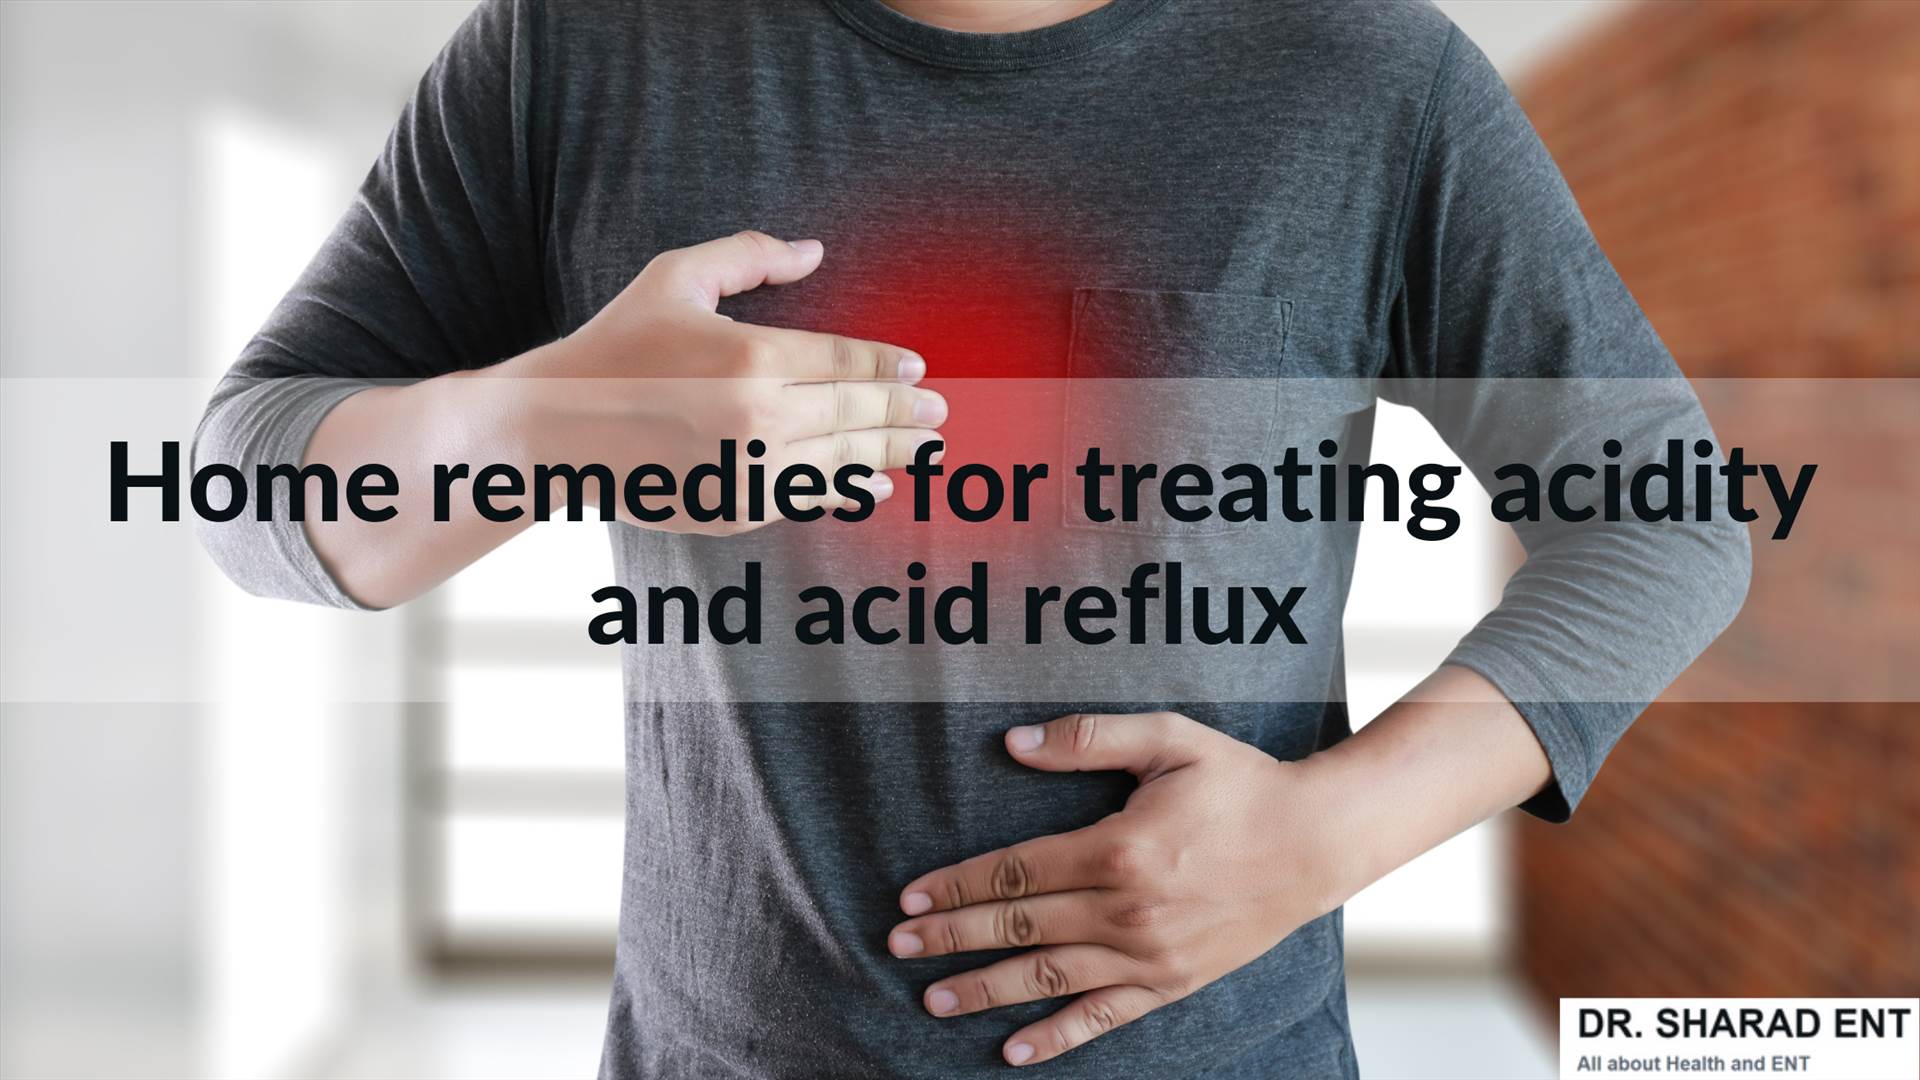 Home remedies for treating acidity and acid reflux (1).png Acidity is typical in every home. A large part of it can be controlled at home by lifestyle changes, a balanced diet, and exercise.  For information, visit: https://www.drsharadent.com/eleven-11-home-remedies-to-treat-acid-reflux-and-acidity/ by Dr Sharad